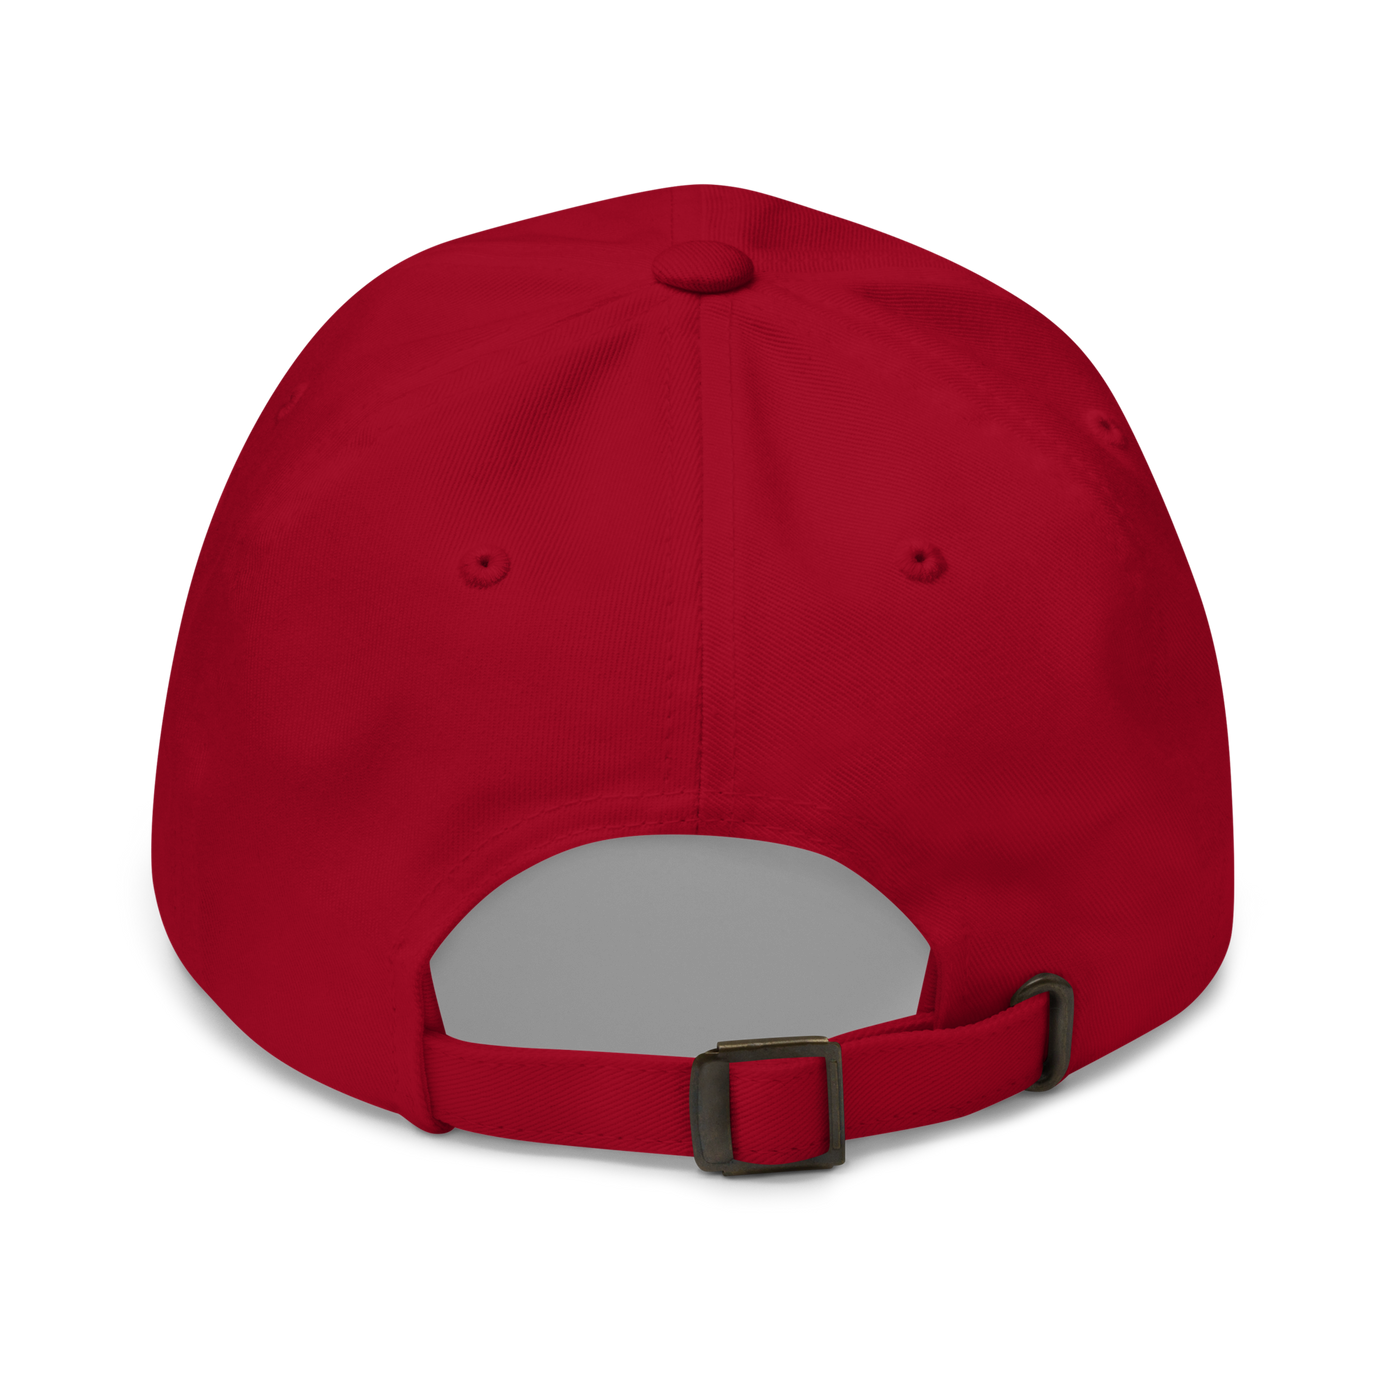 Original Get Board Relaxed Hat